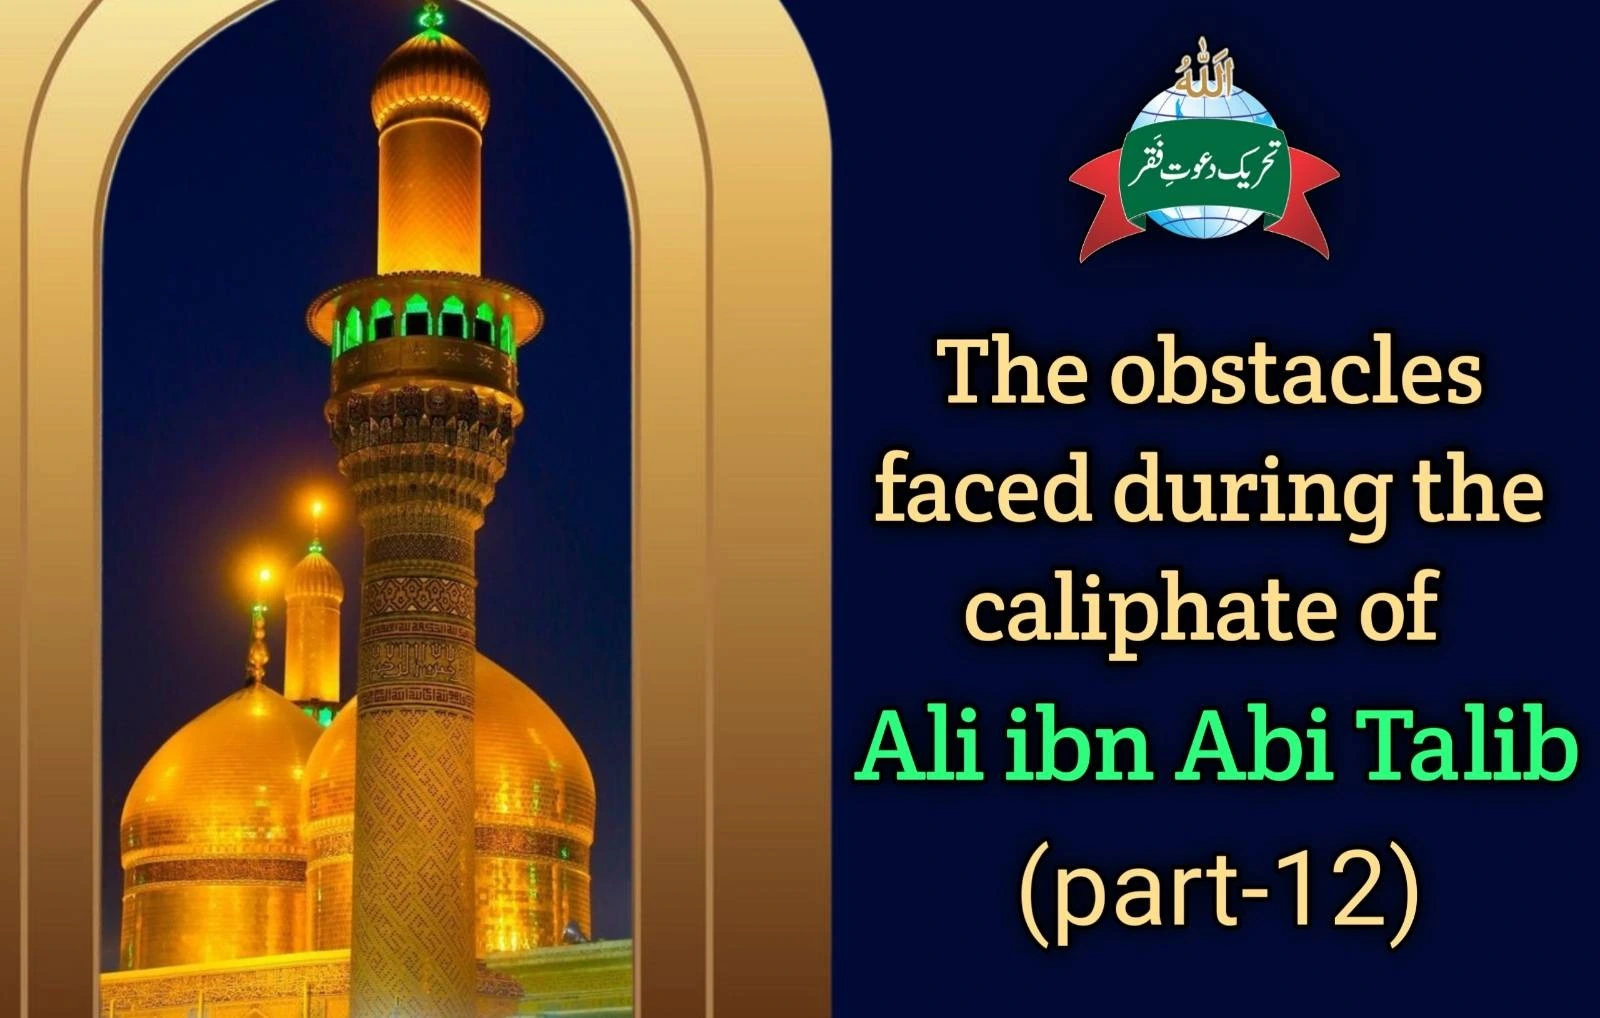 THE OBSTACLES FACED DURING THE CALIPHATE OF ALI IBN ABI TALIB Part 12